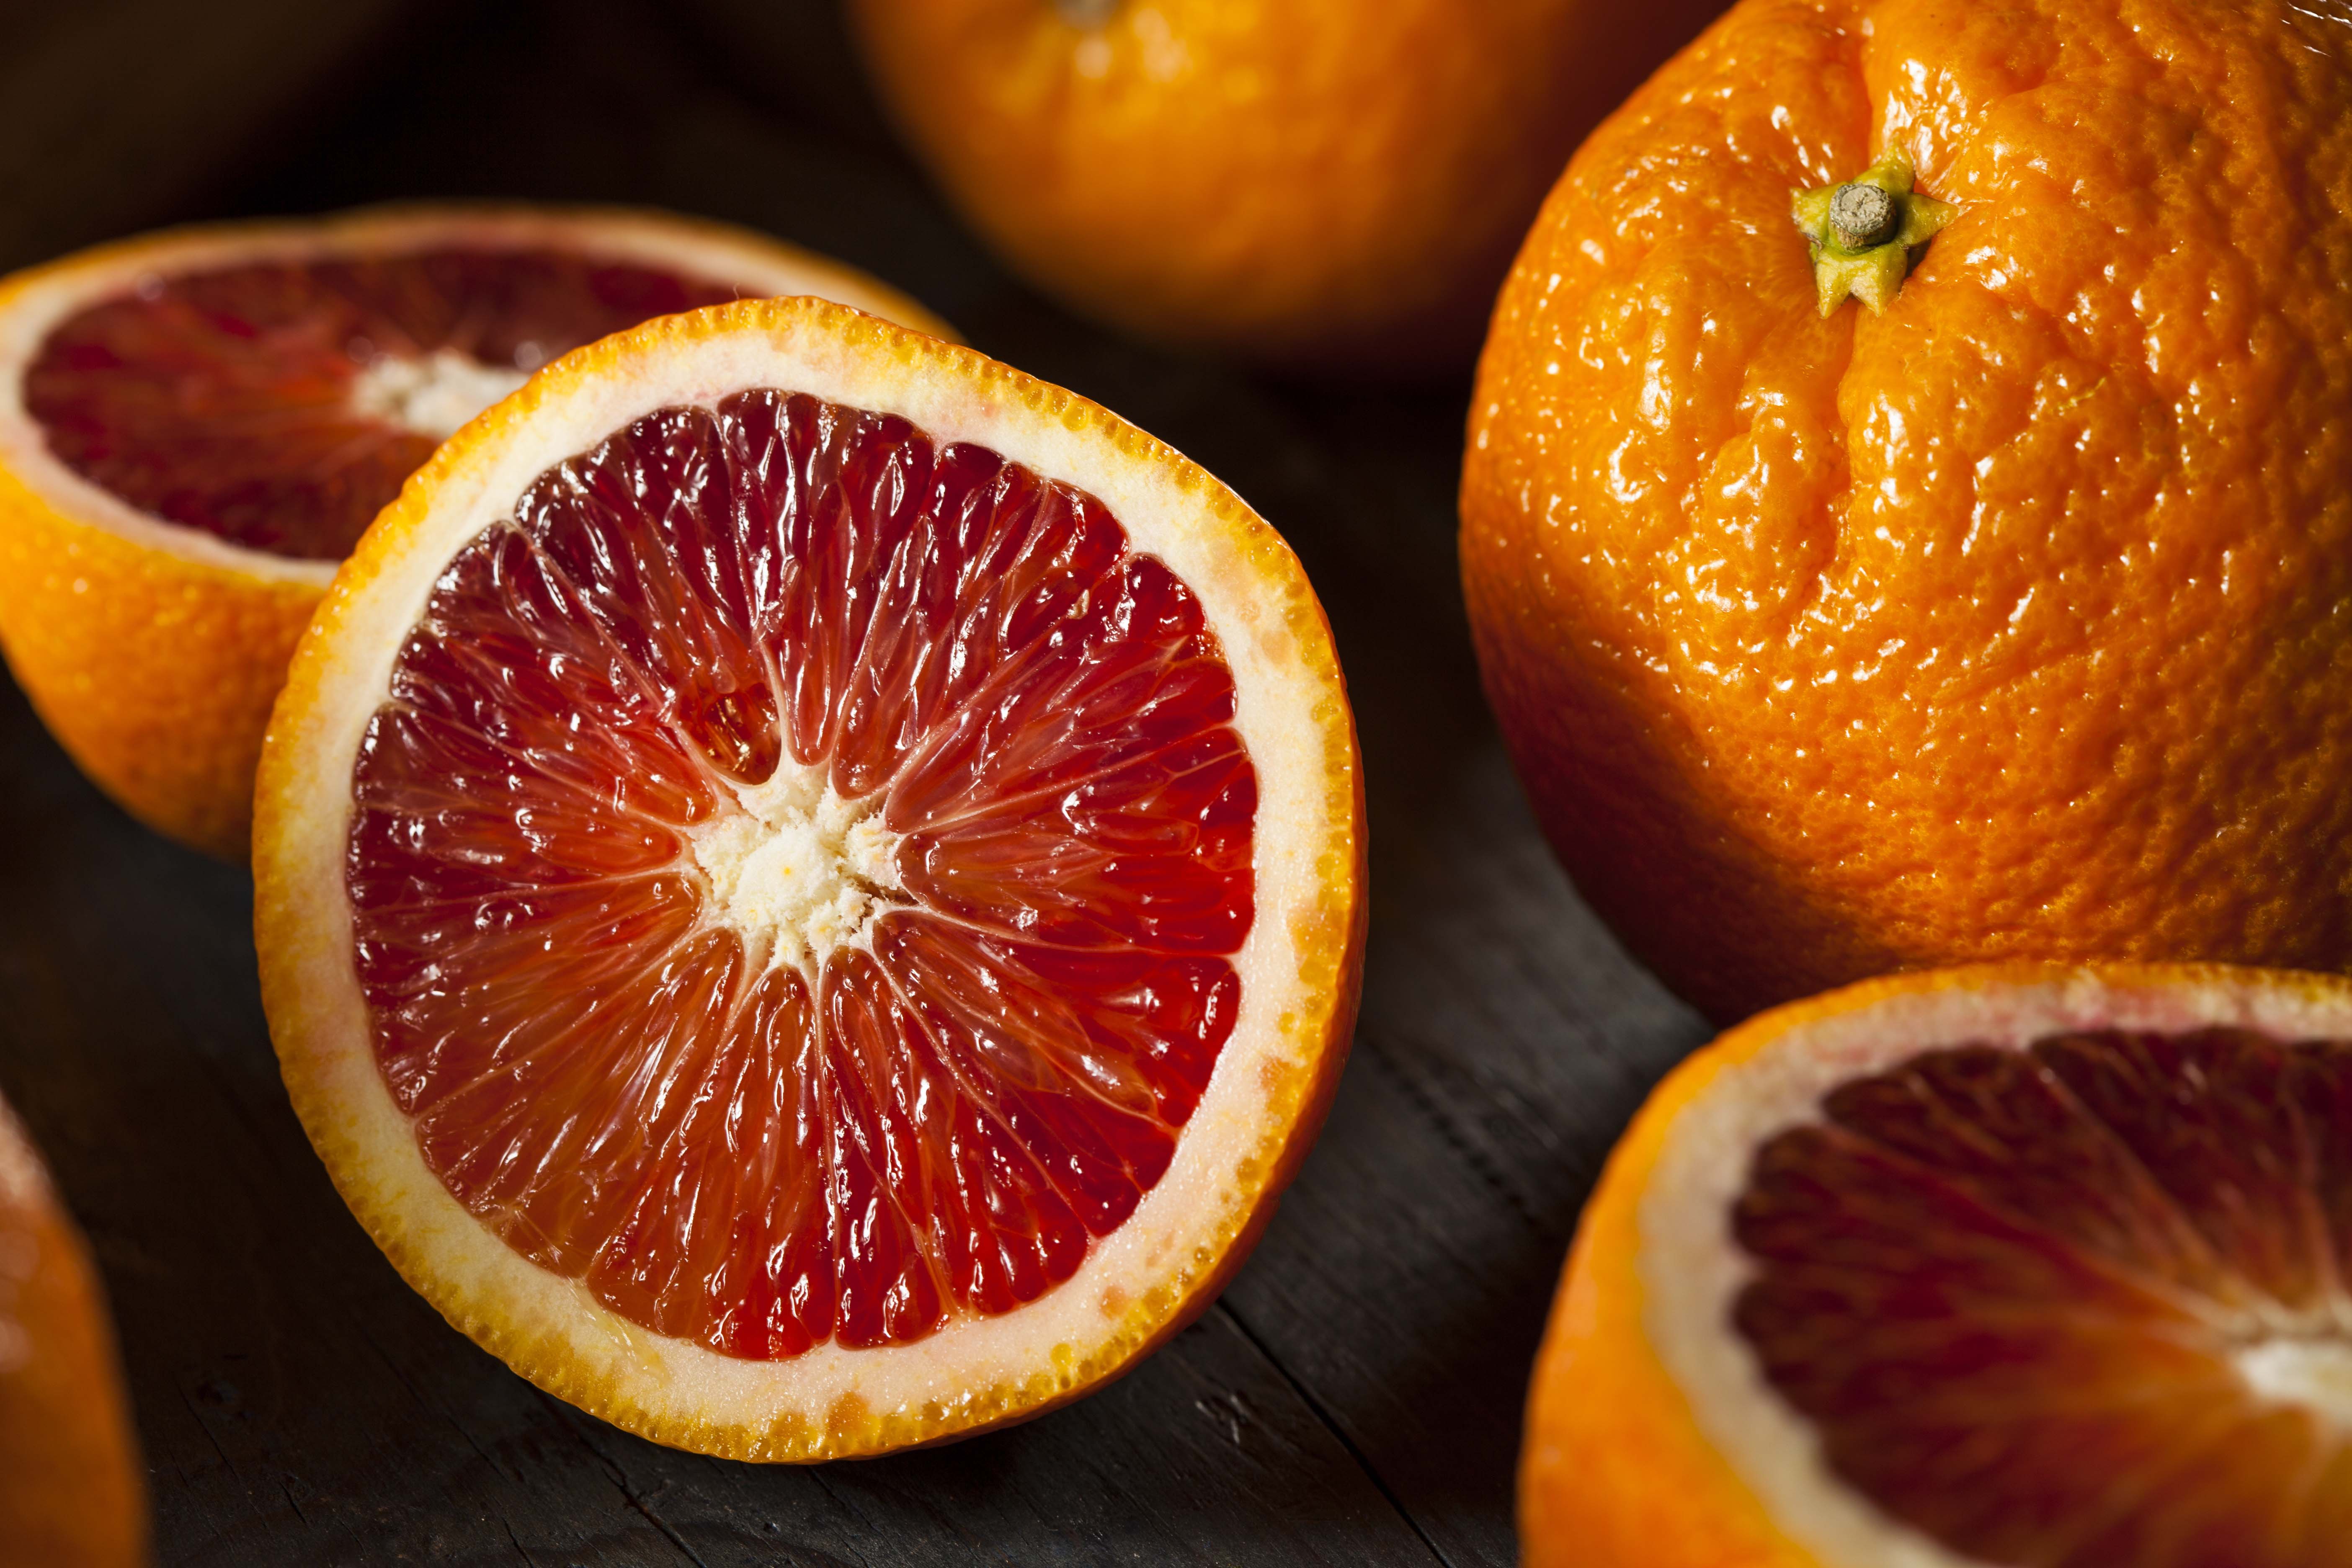 Whole and cut blood oranges